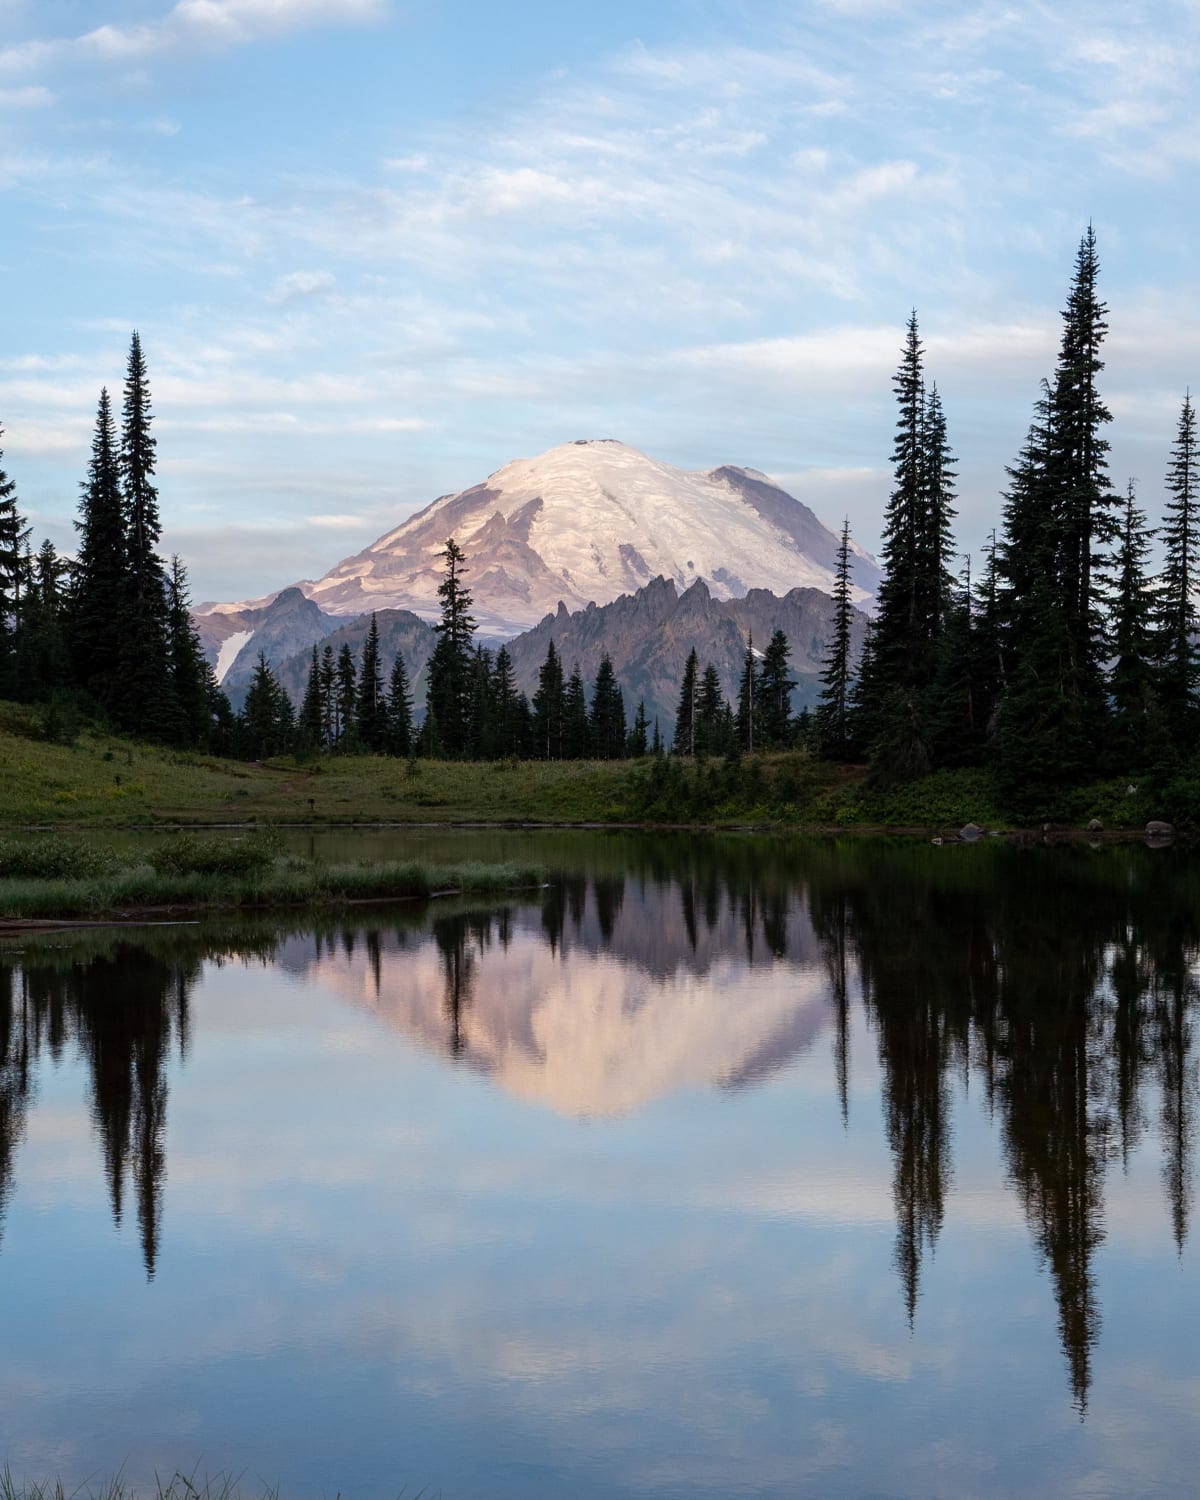 An early morning in Mount Rainier National Park. The sound of elk bugling and birds chirping made this peaceful morning complete.